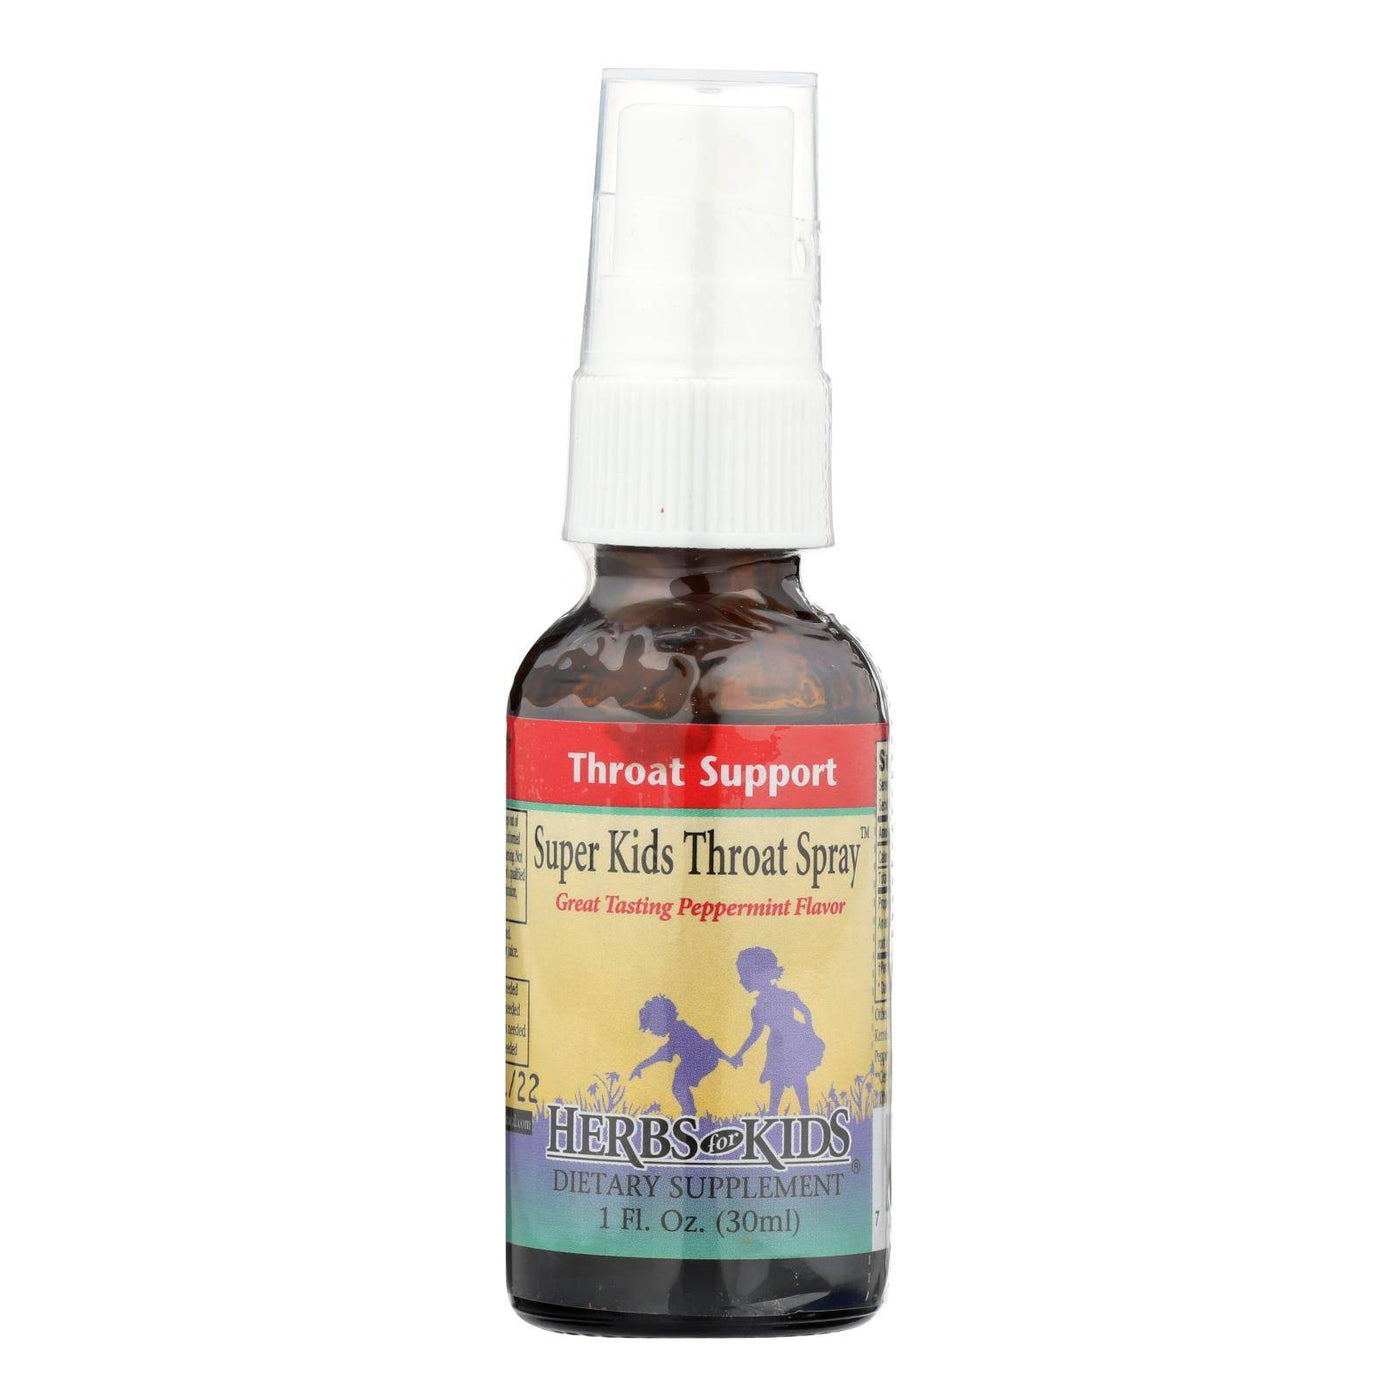 Buy Herbs For Kids Super Kid's Throat Spray Peppermint - 1 Fl Oz  at OnlyNaturals.us